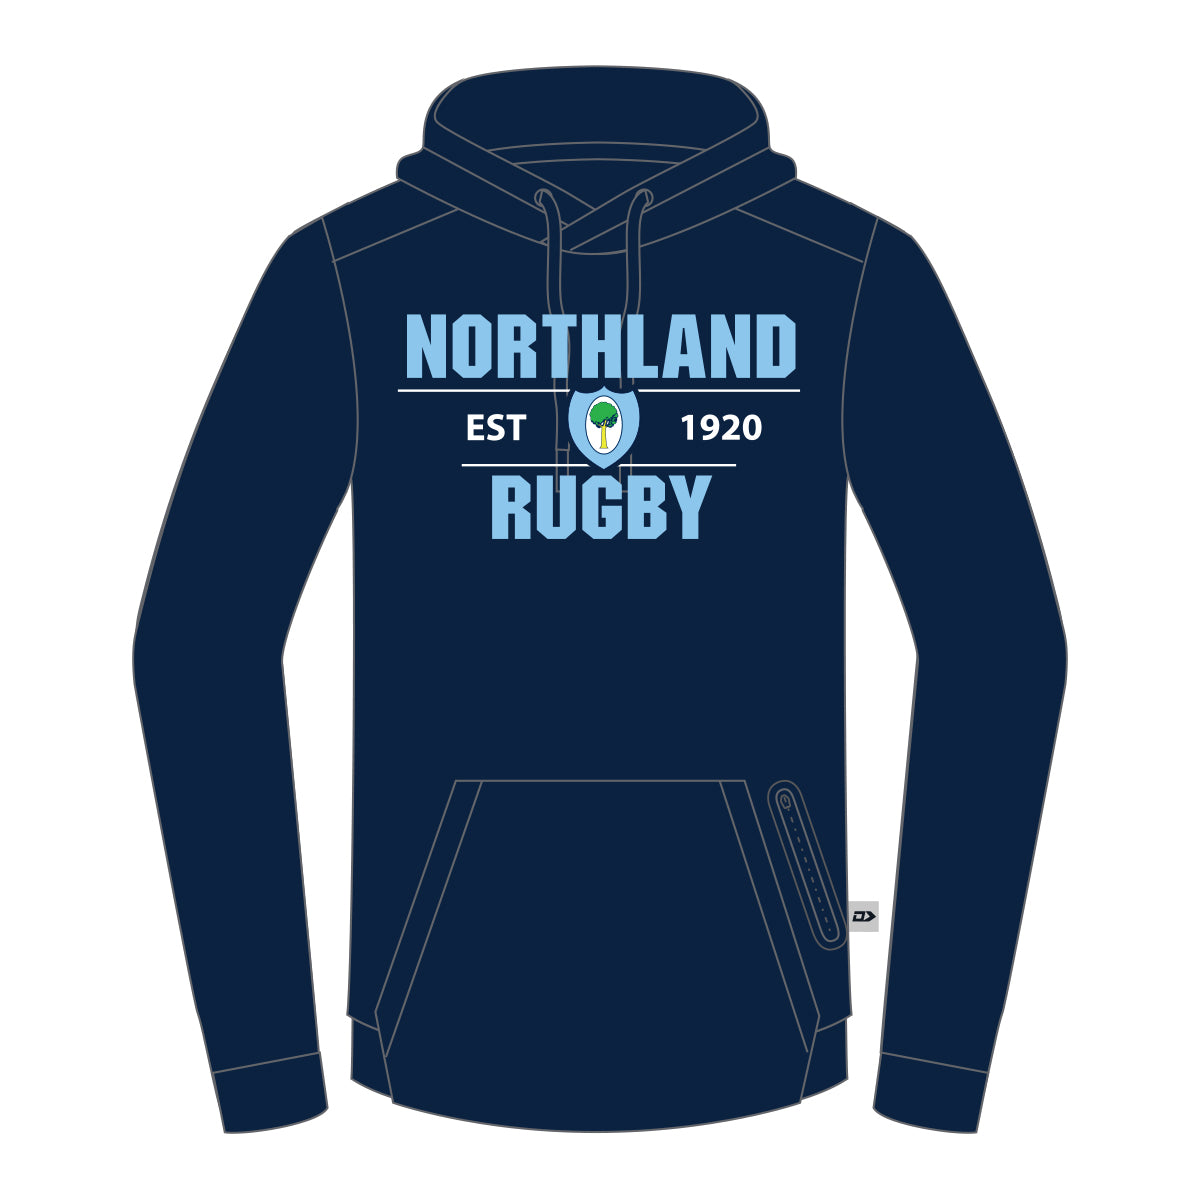 2020 Northland Rugby Mens Pullover Hoodie